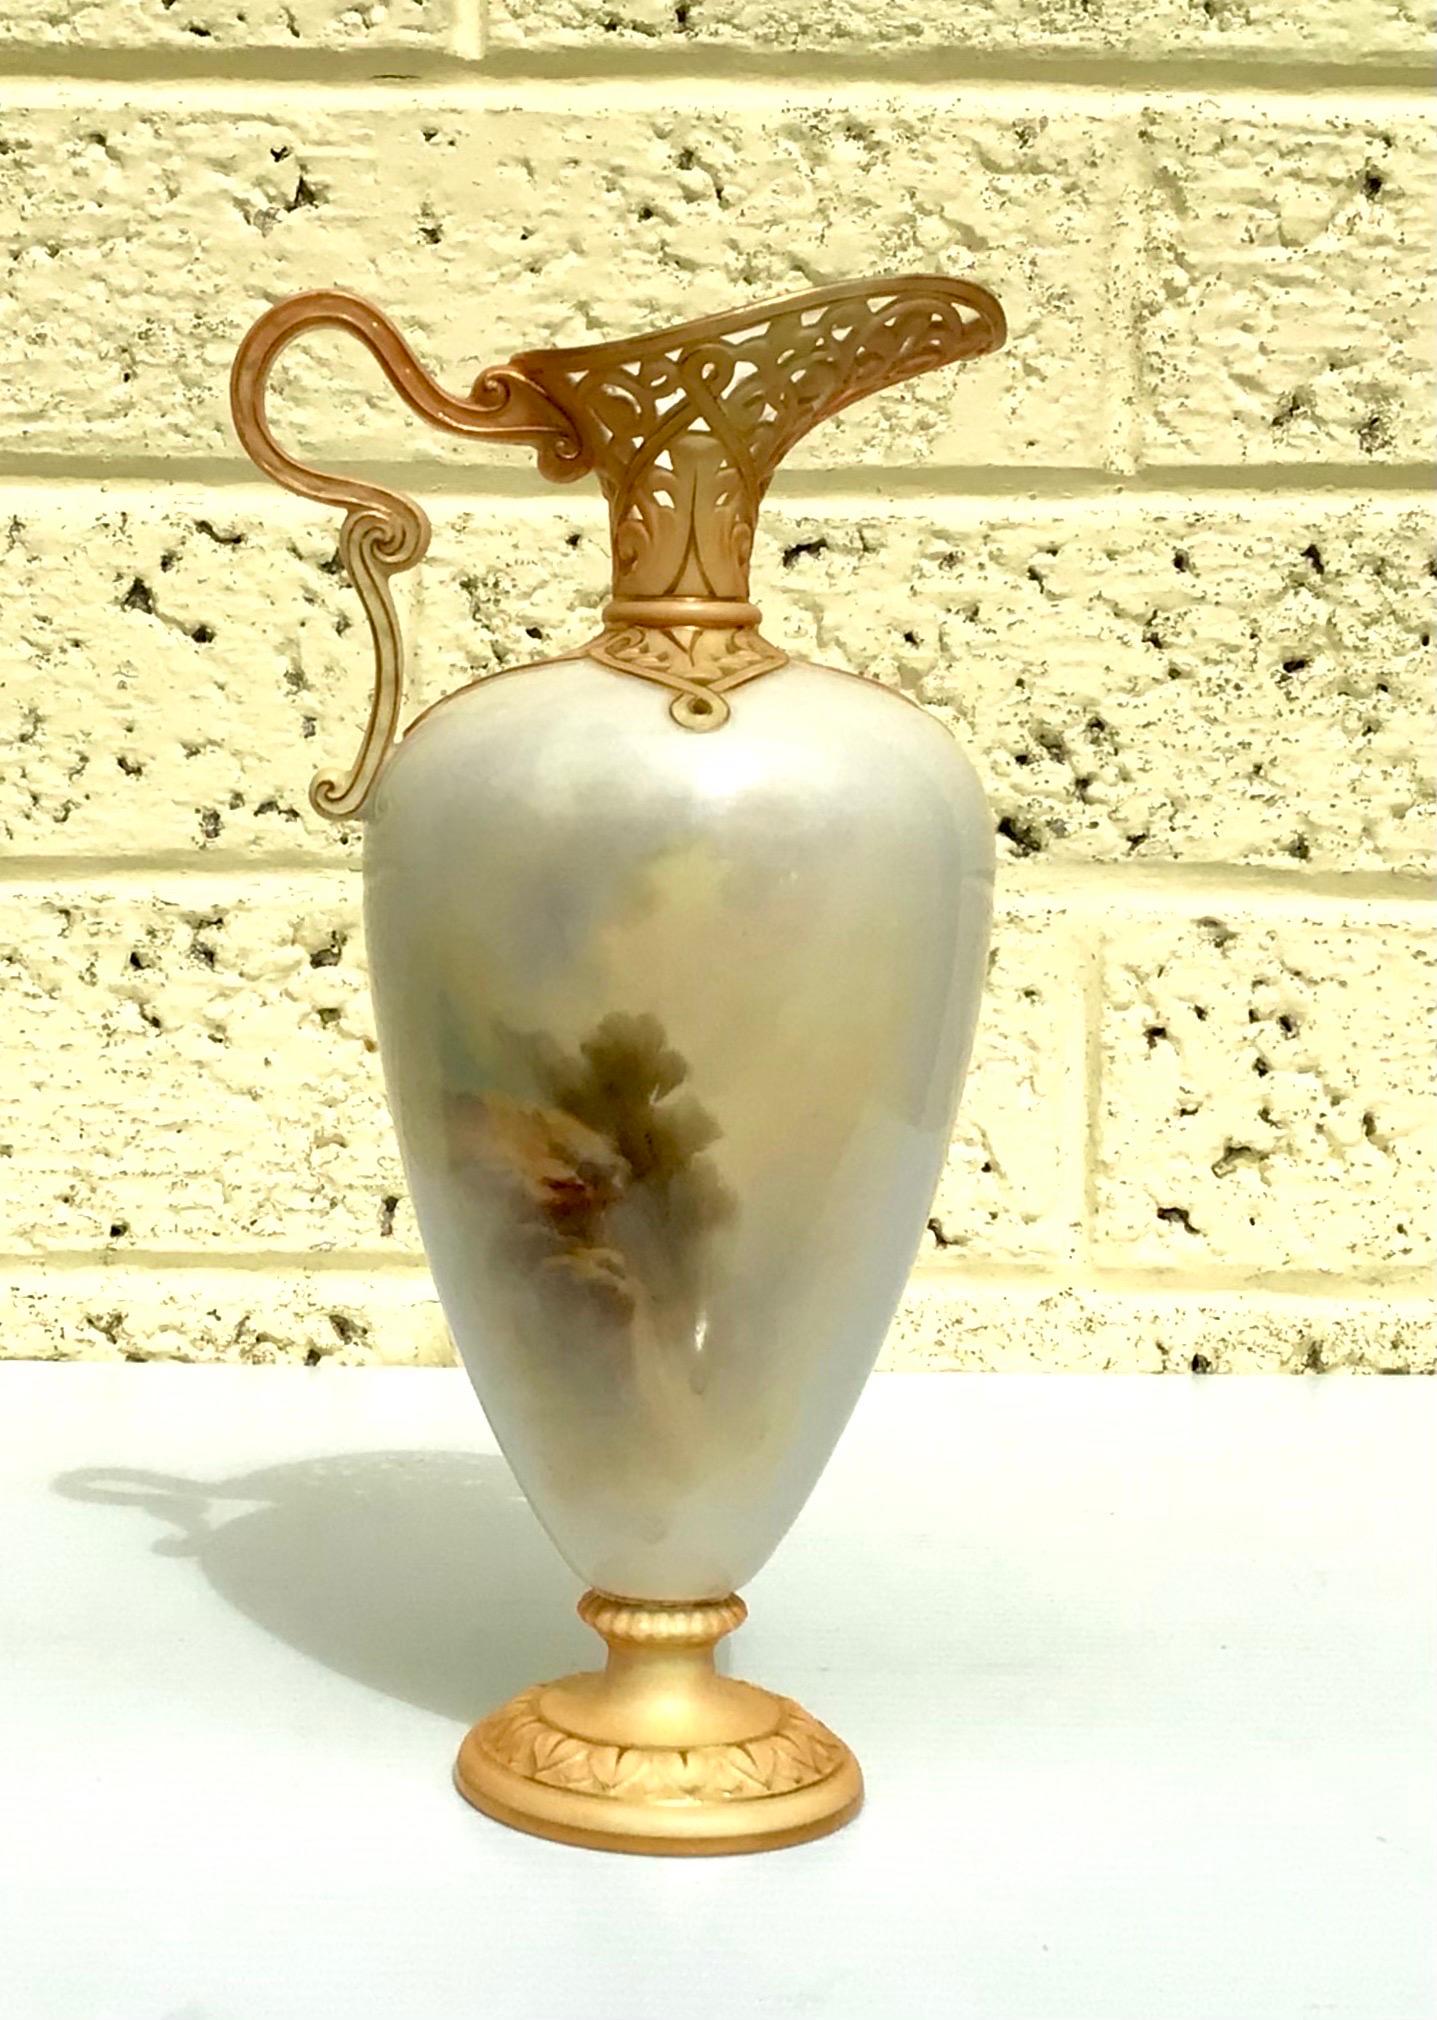 Antique Royal Worcester Porcelain Ewer, Vase by John Stinton In Good Condition For Sale In Antrim, GB